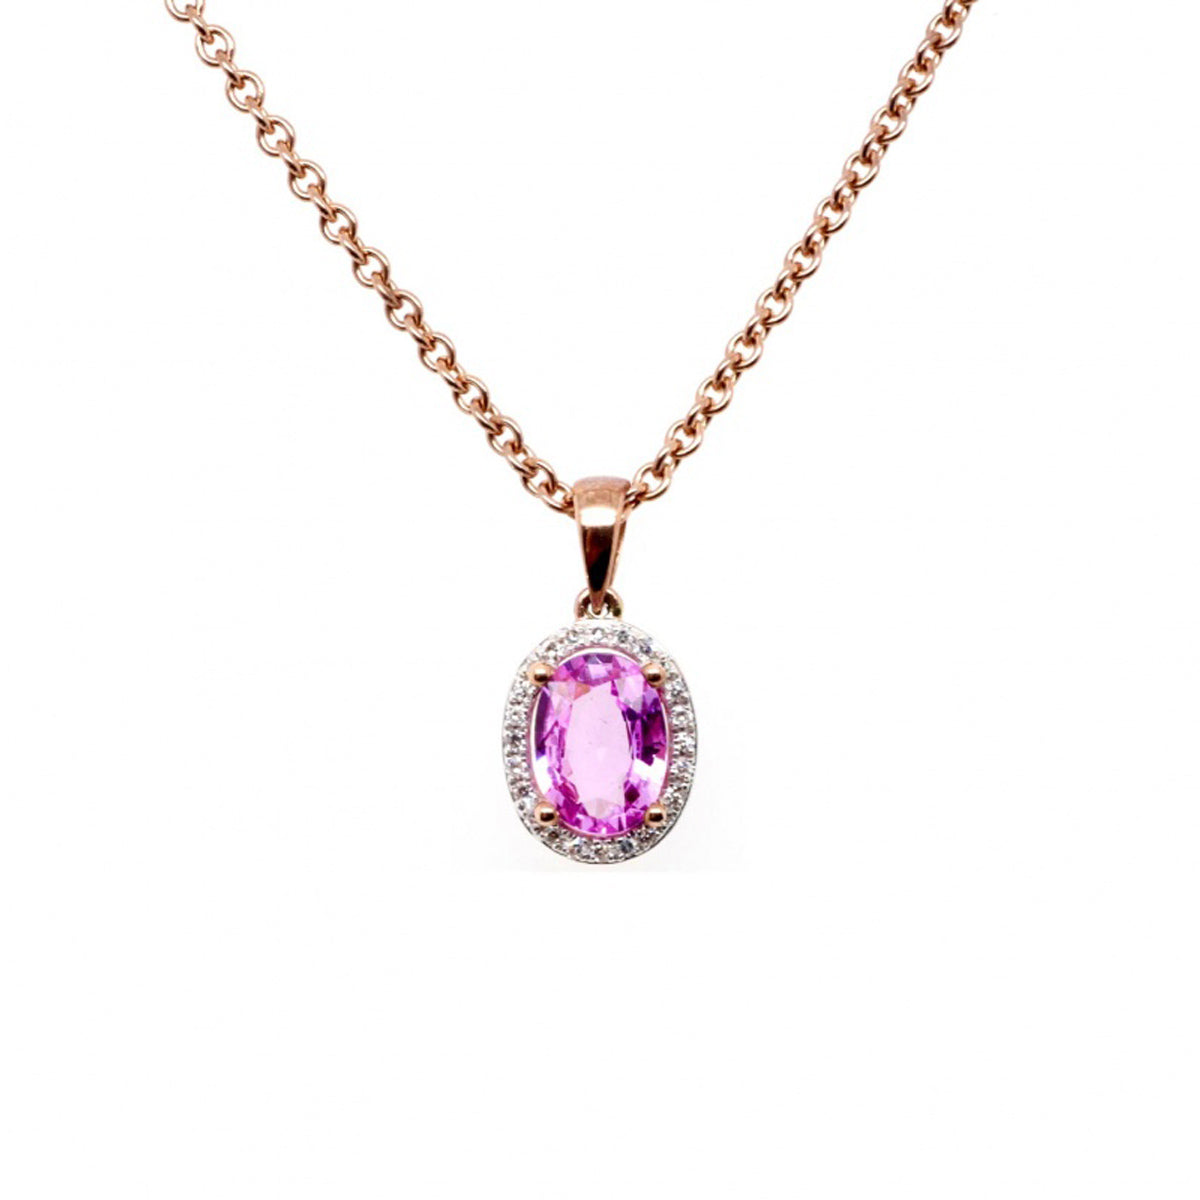 HEART SHAPED NECKLACE WITH PINK SAPPHIRES - Howard's Jewelry Center